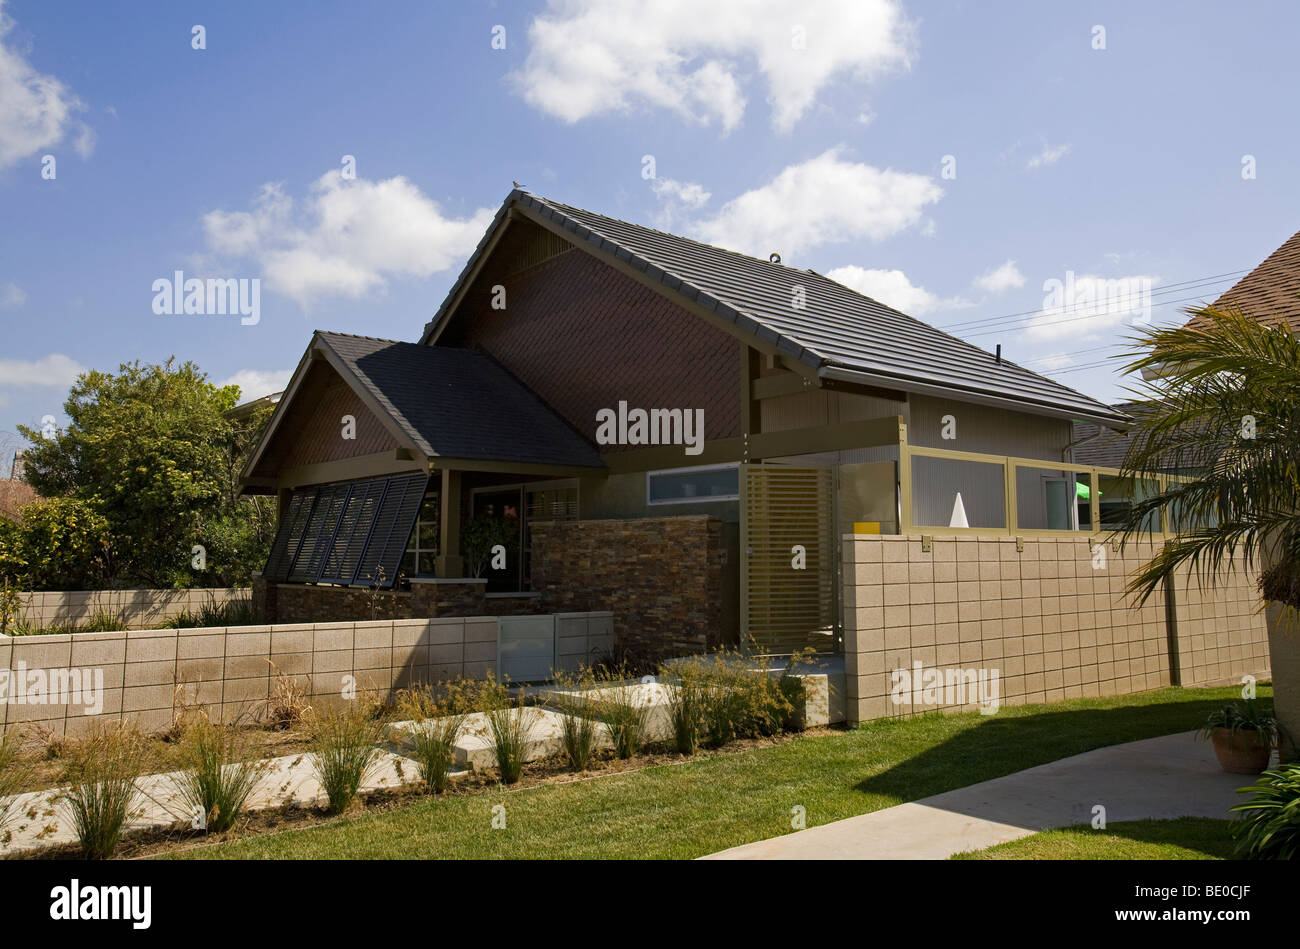 House in Long Beach retrofitted with Building Integrated Photovoltaics (BIPV) Modules, California, USA Stock Photo